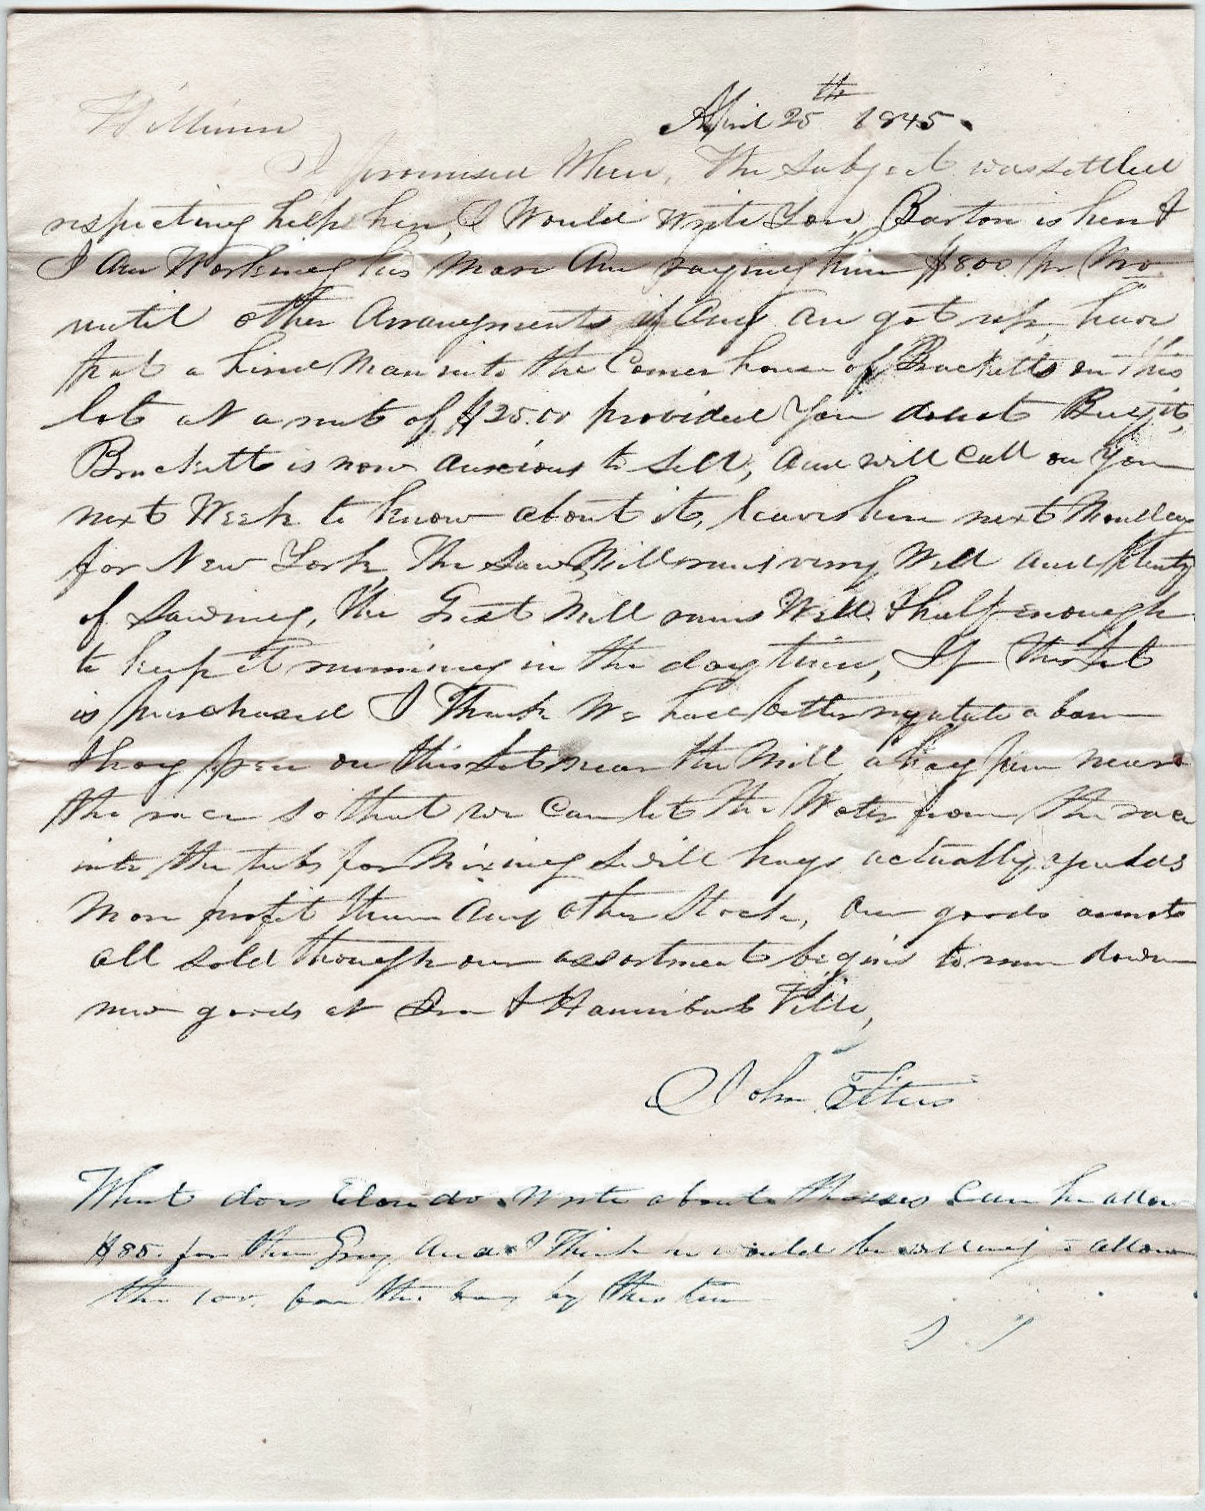 Translation of Letter from H. Studtmann to Vorsitzer, August 18, 1932] -  Page 3 of 3 - The Portal to Texas History